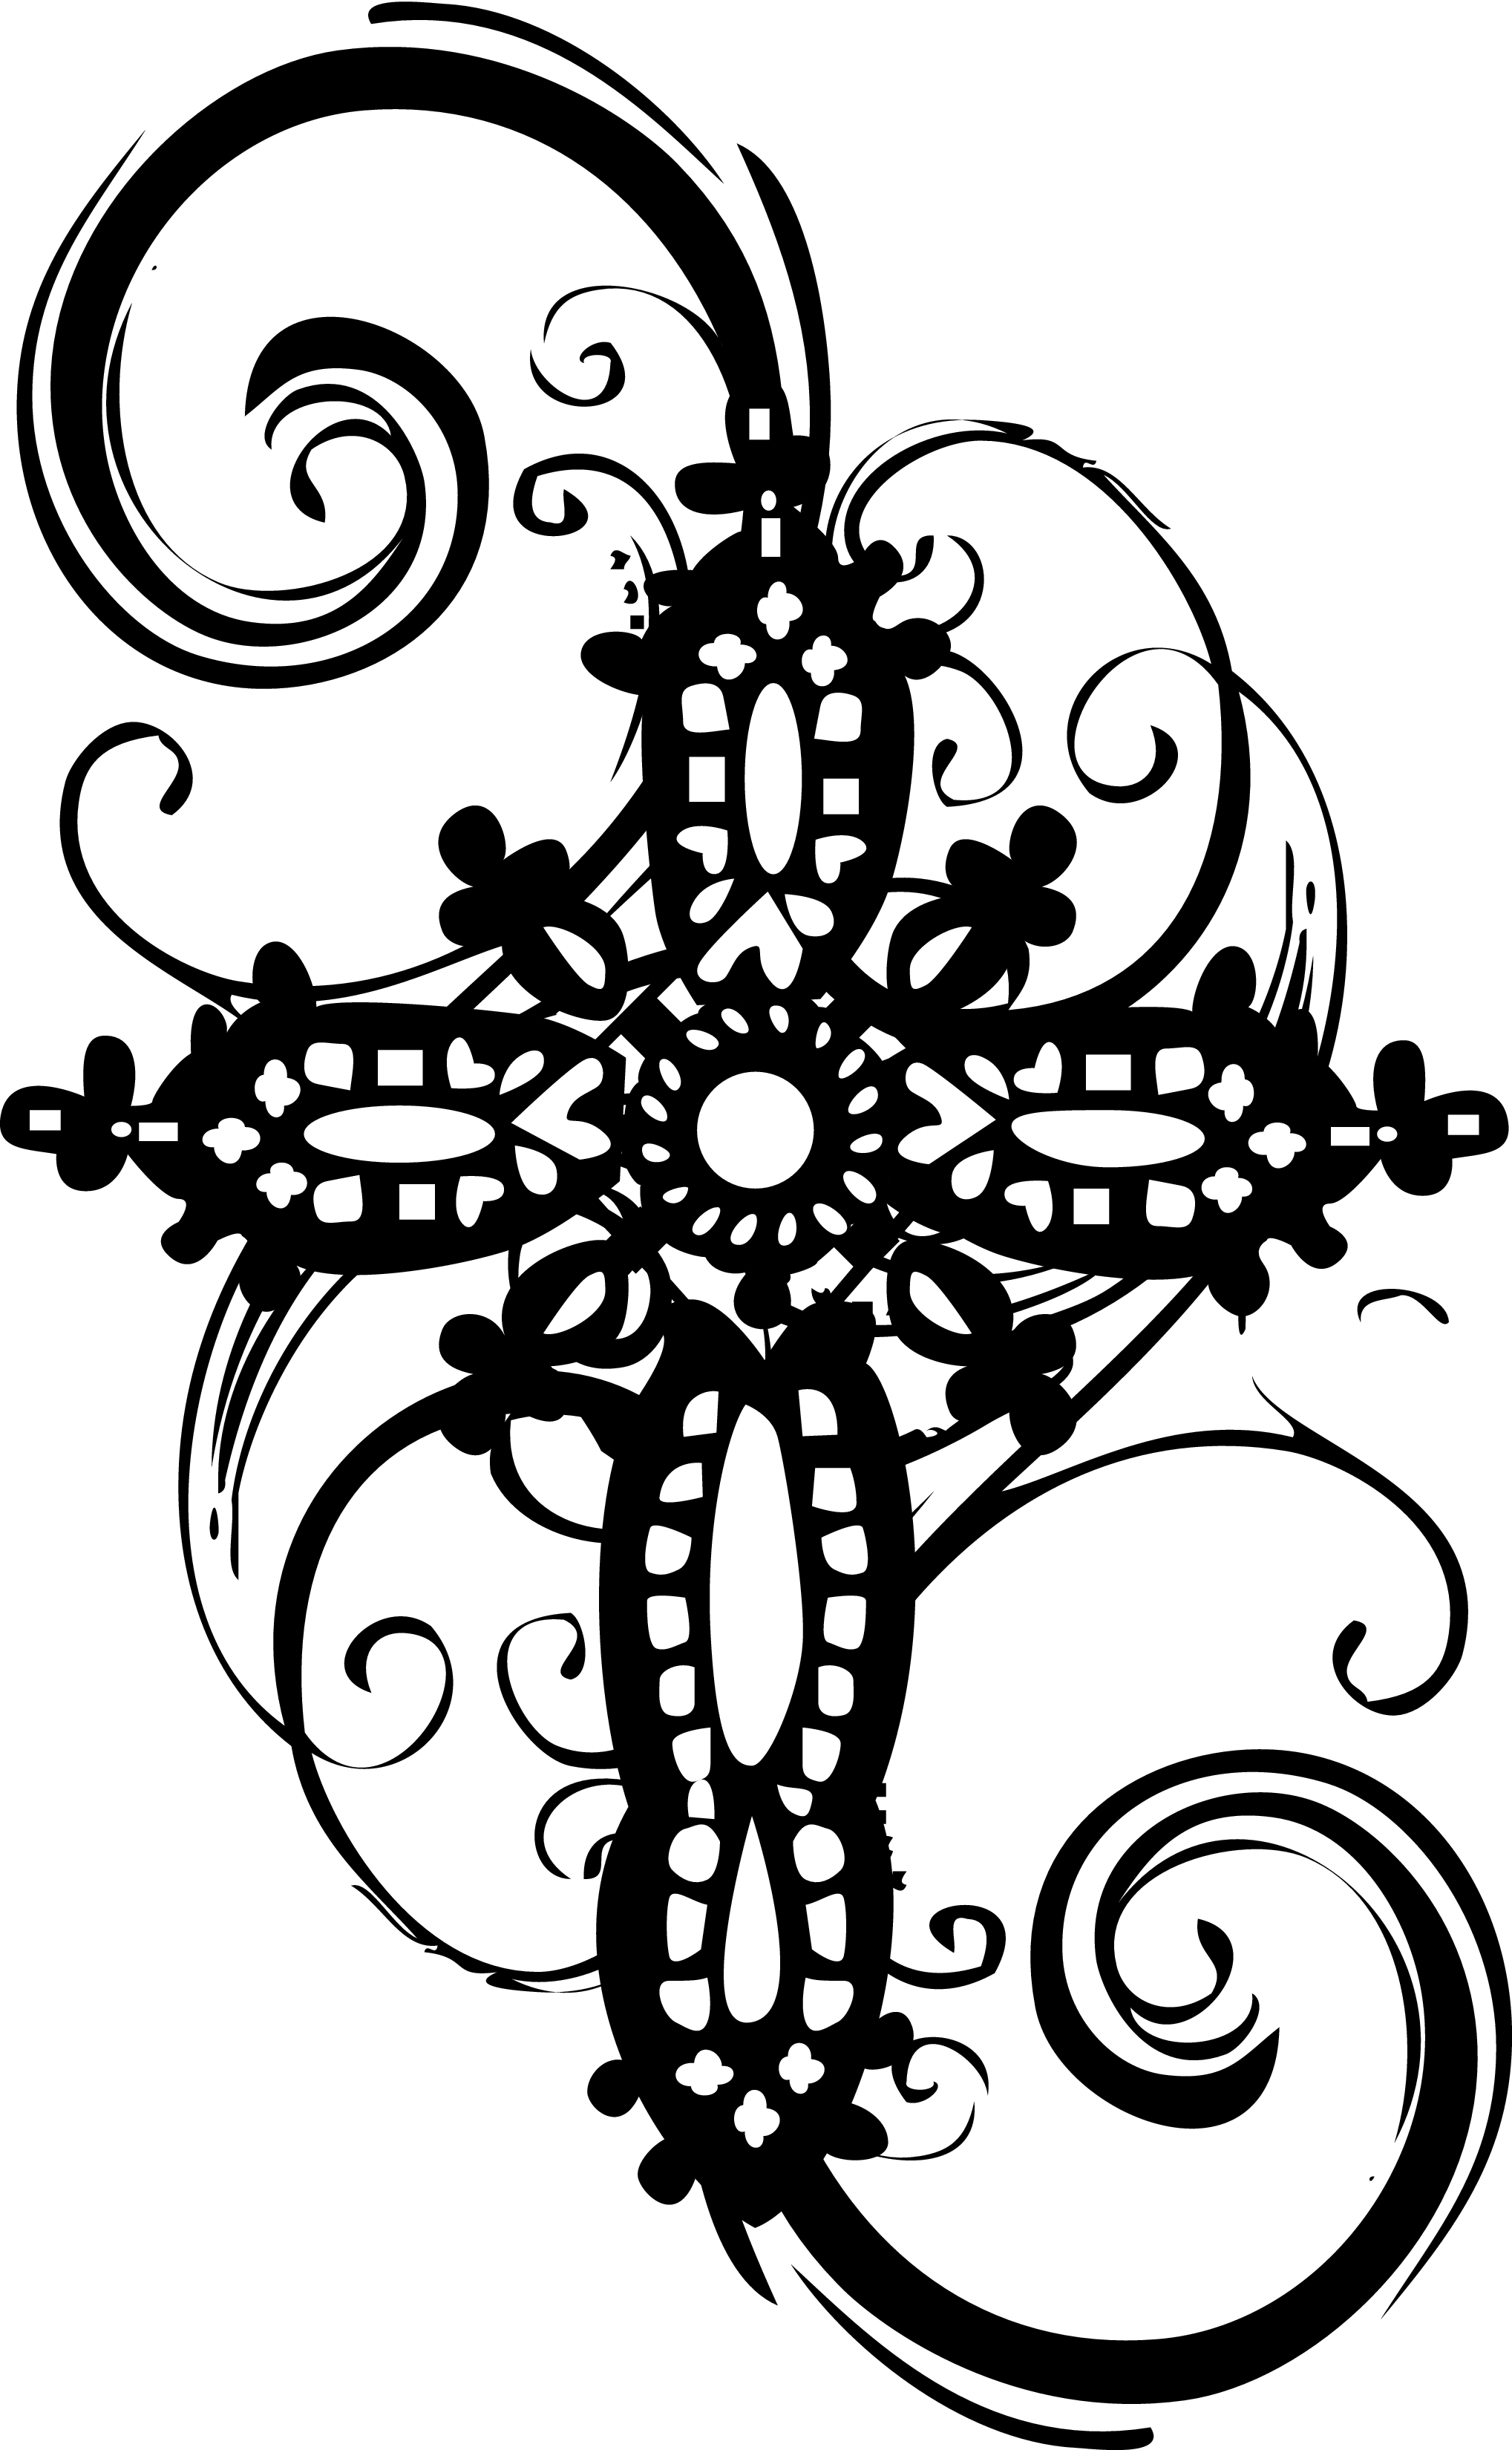 Cross  black and white baptism cross clipart black and white free 2 image